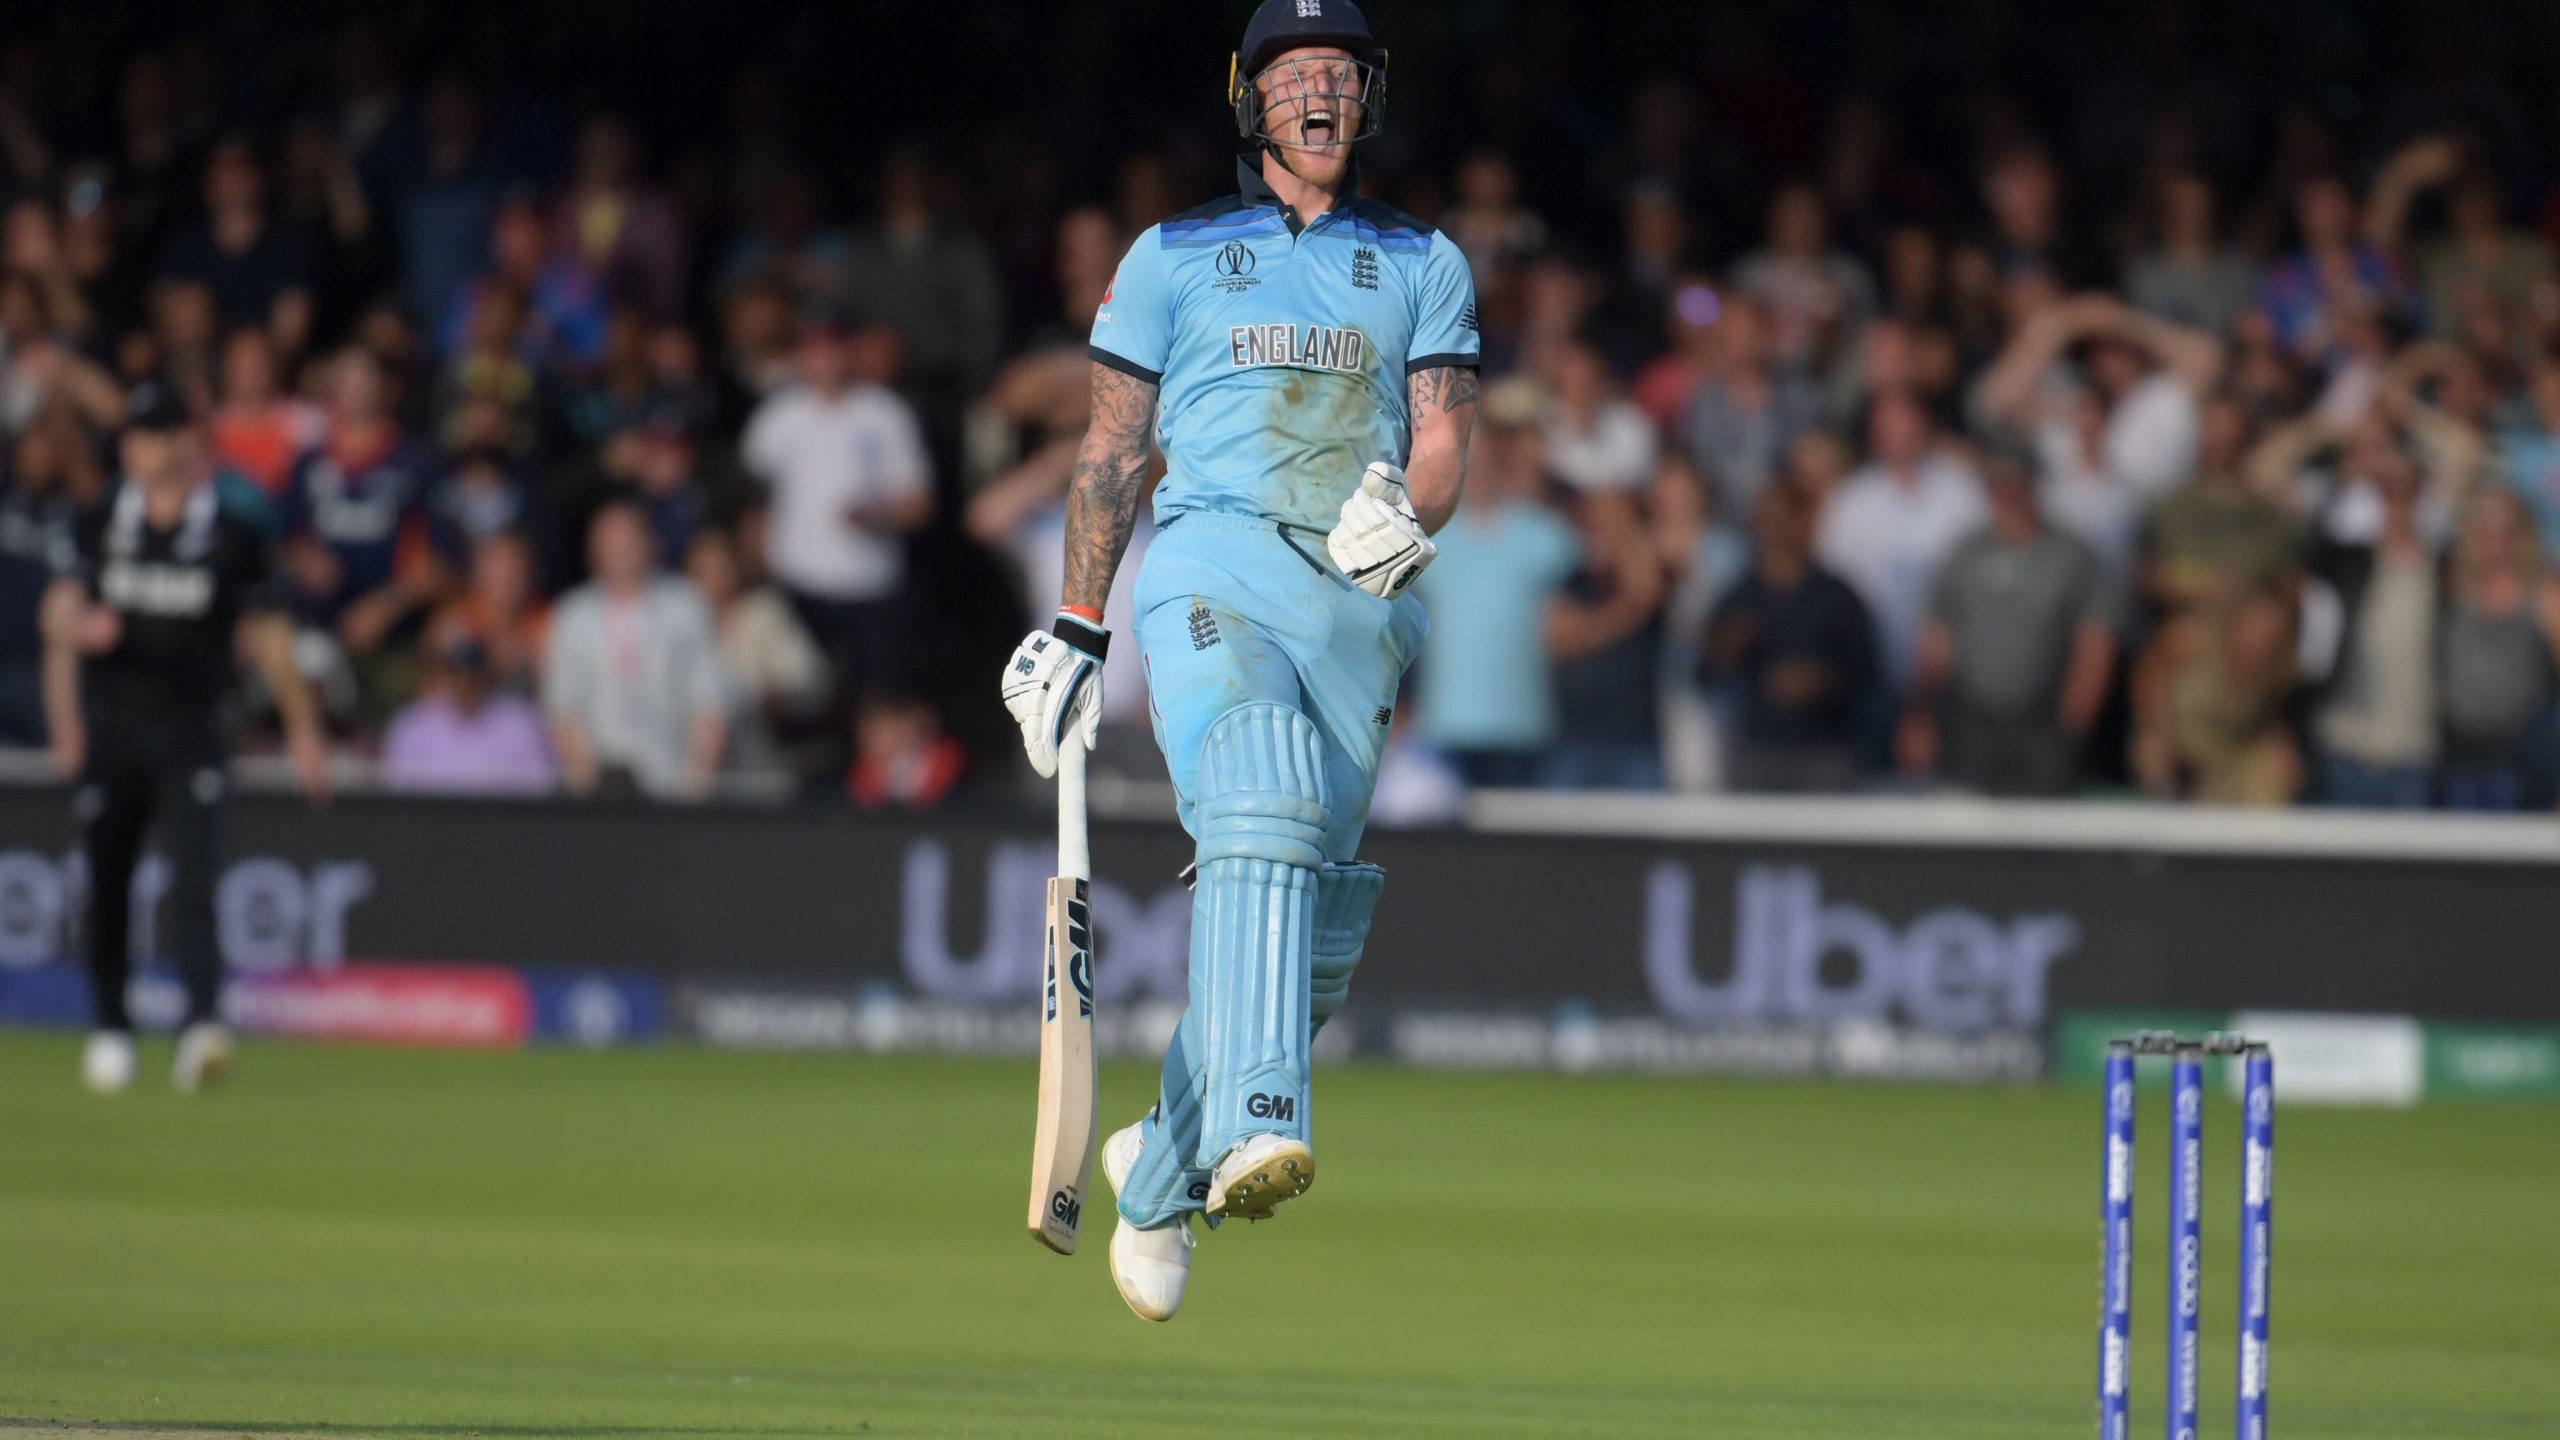 Big Ben Stokes to retire from ODIs: Five best knocks at a glance